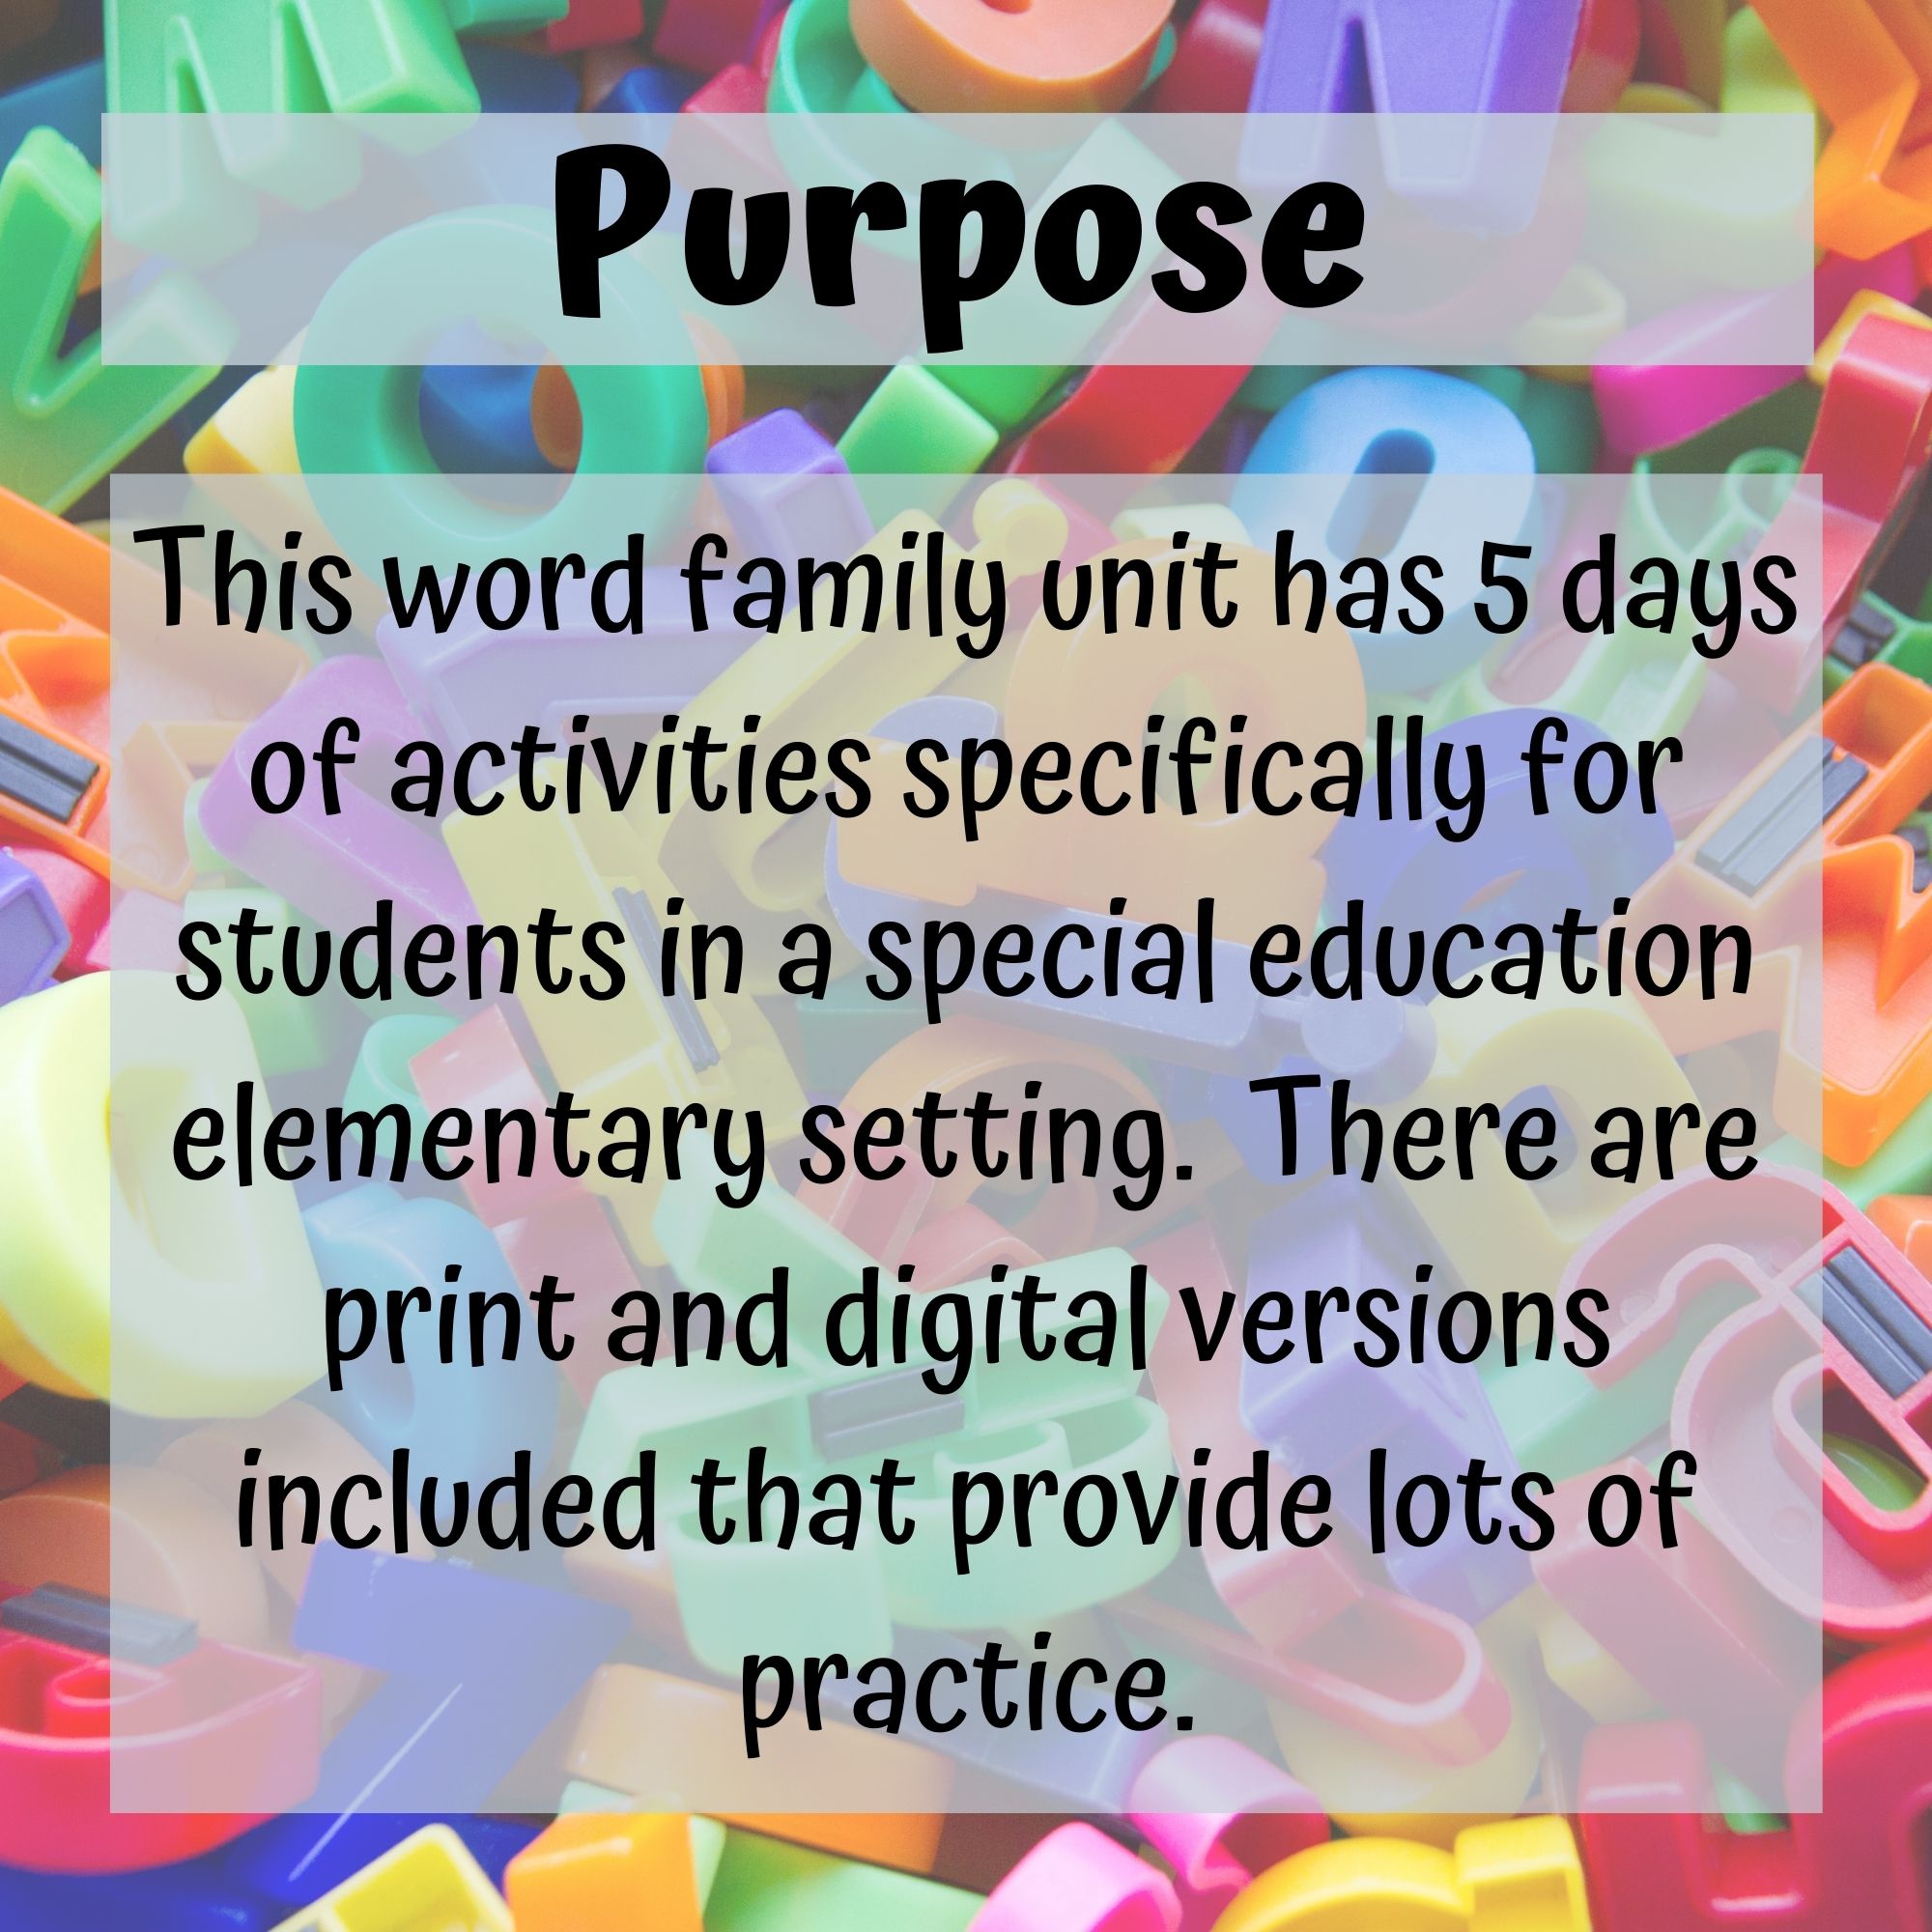 um Word Family for Special Education